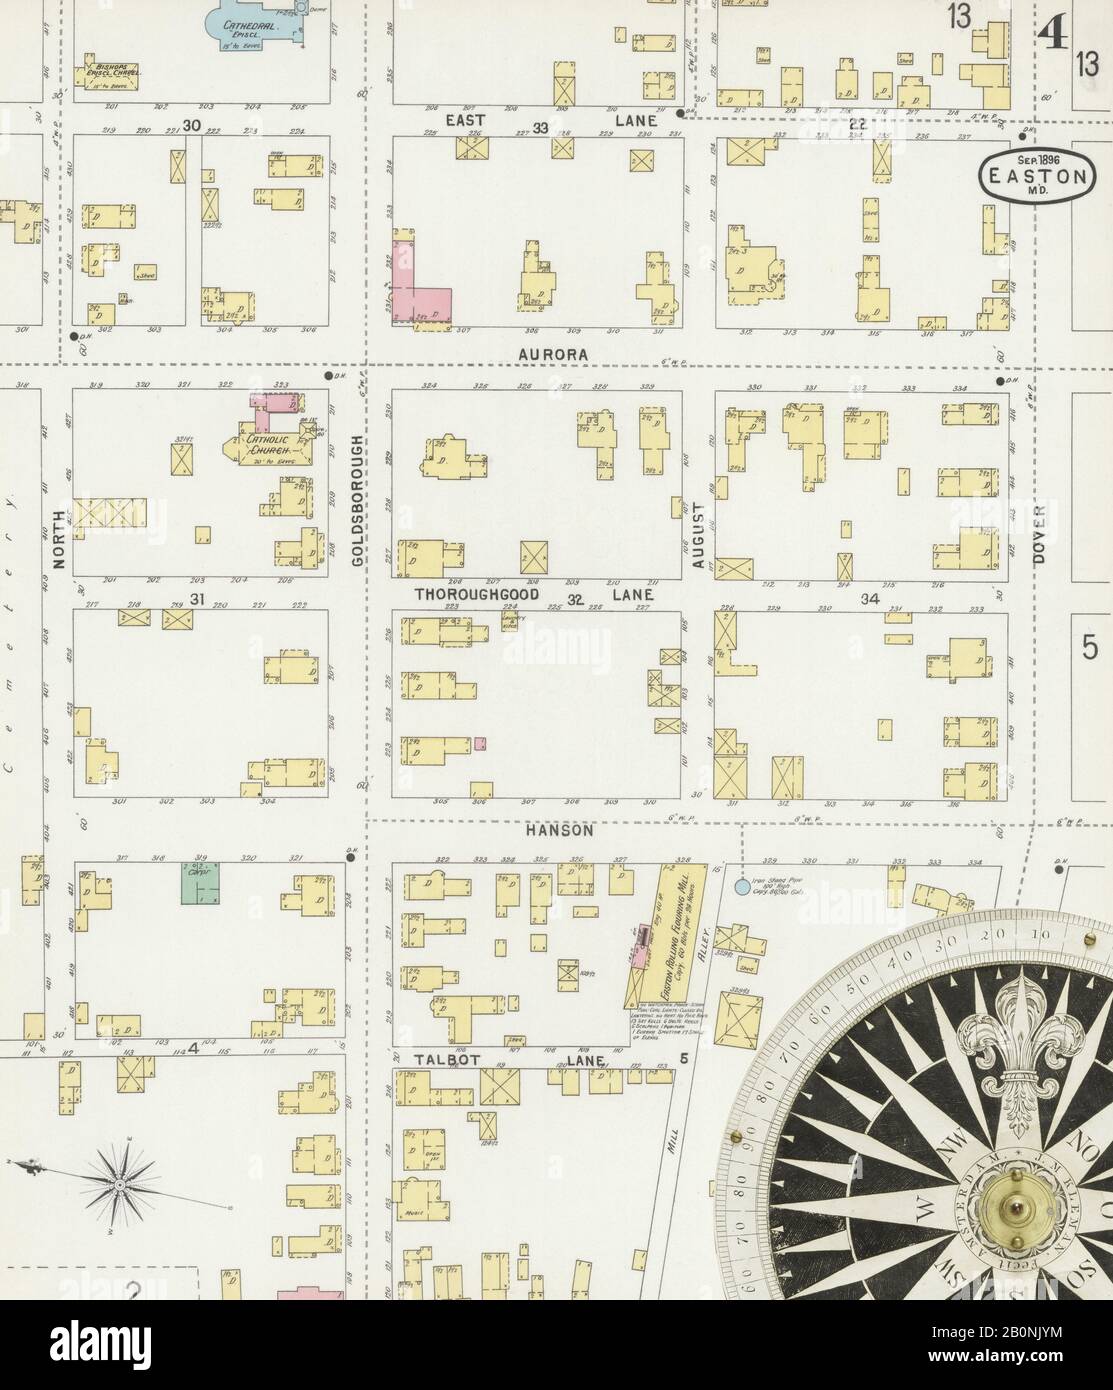 Image 4 of Sanborn Fire Insurance Map from Easton, Talbot County, Maryland. Sep 1896. 13 Sheet(s). Includes Saint Michaels, Oxford, Trappe, America, street map with a Nineteenth Century compass Stock Photo